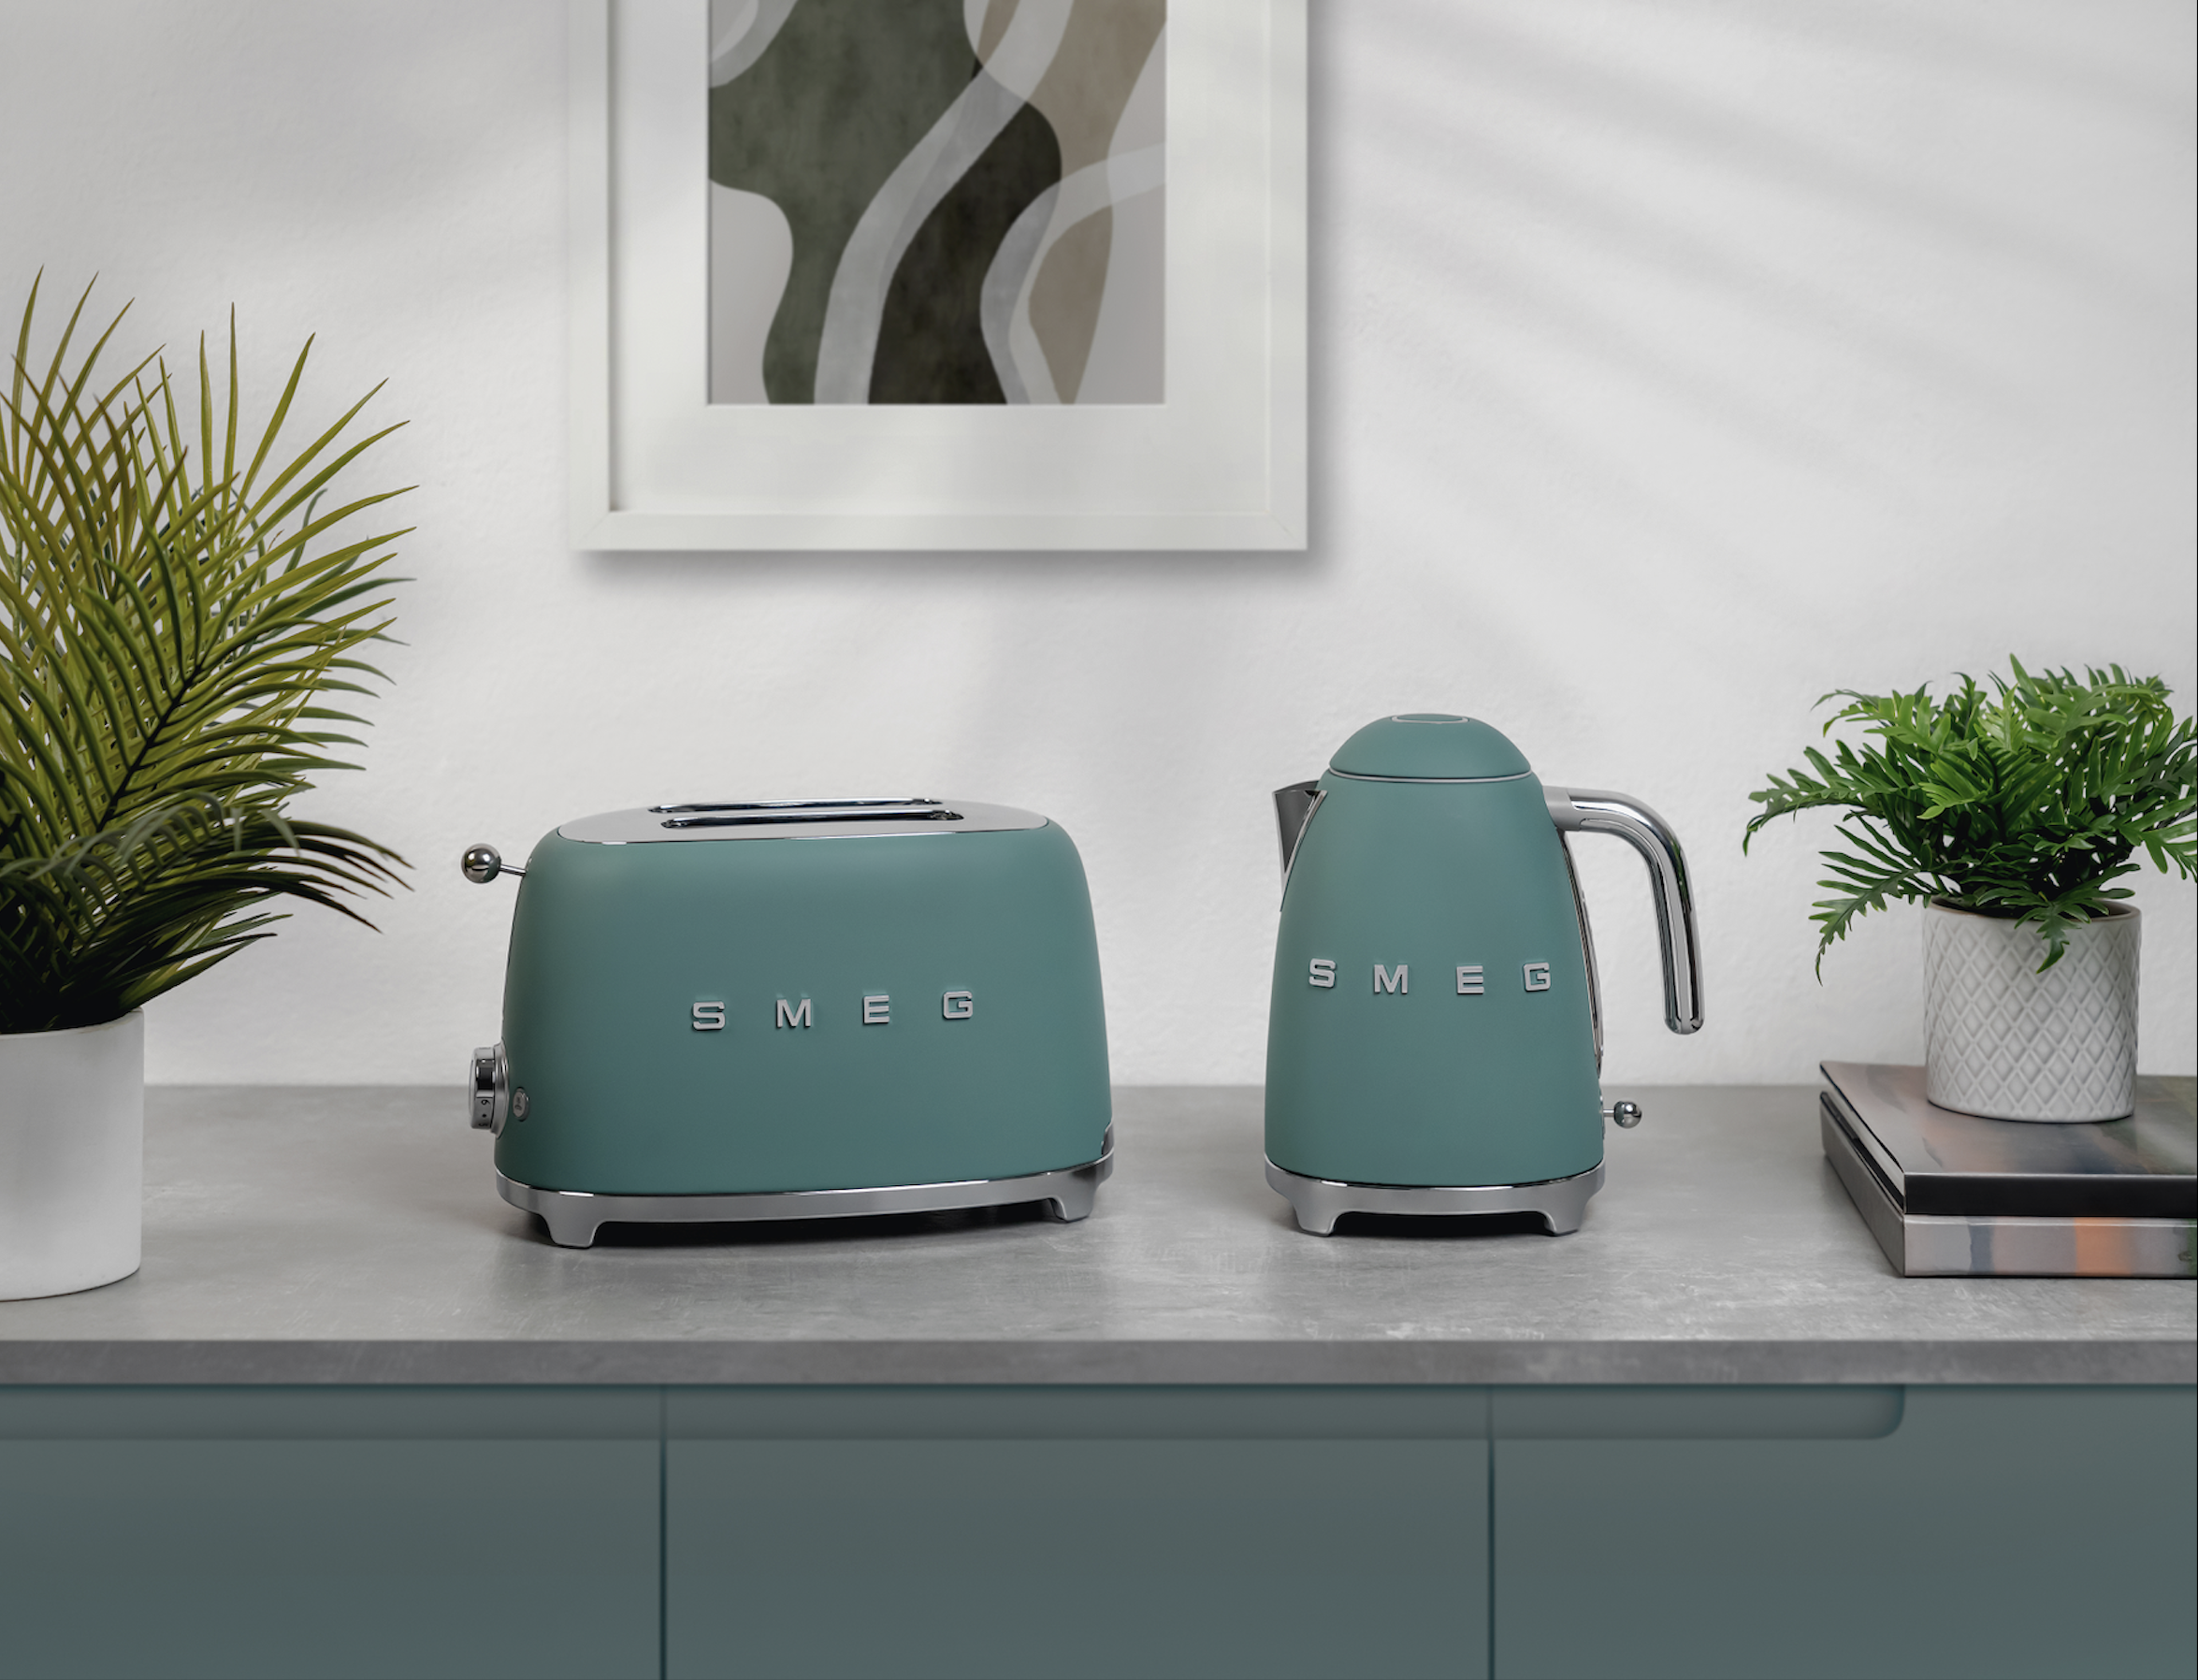 Smeg launches new emerald green colourway